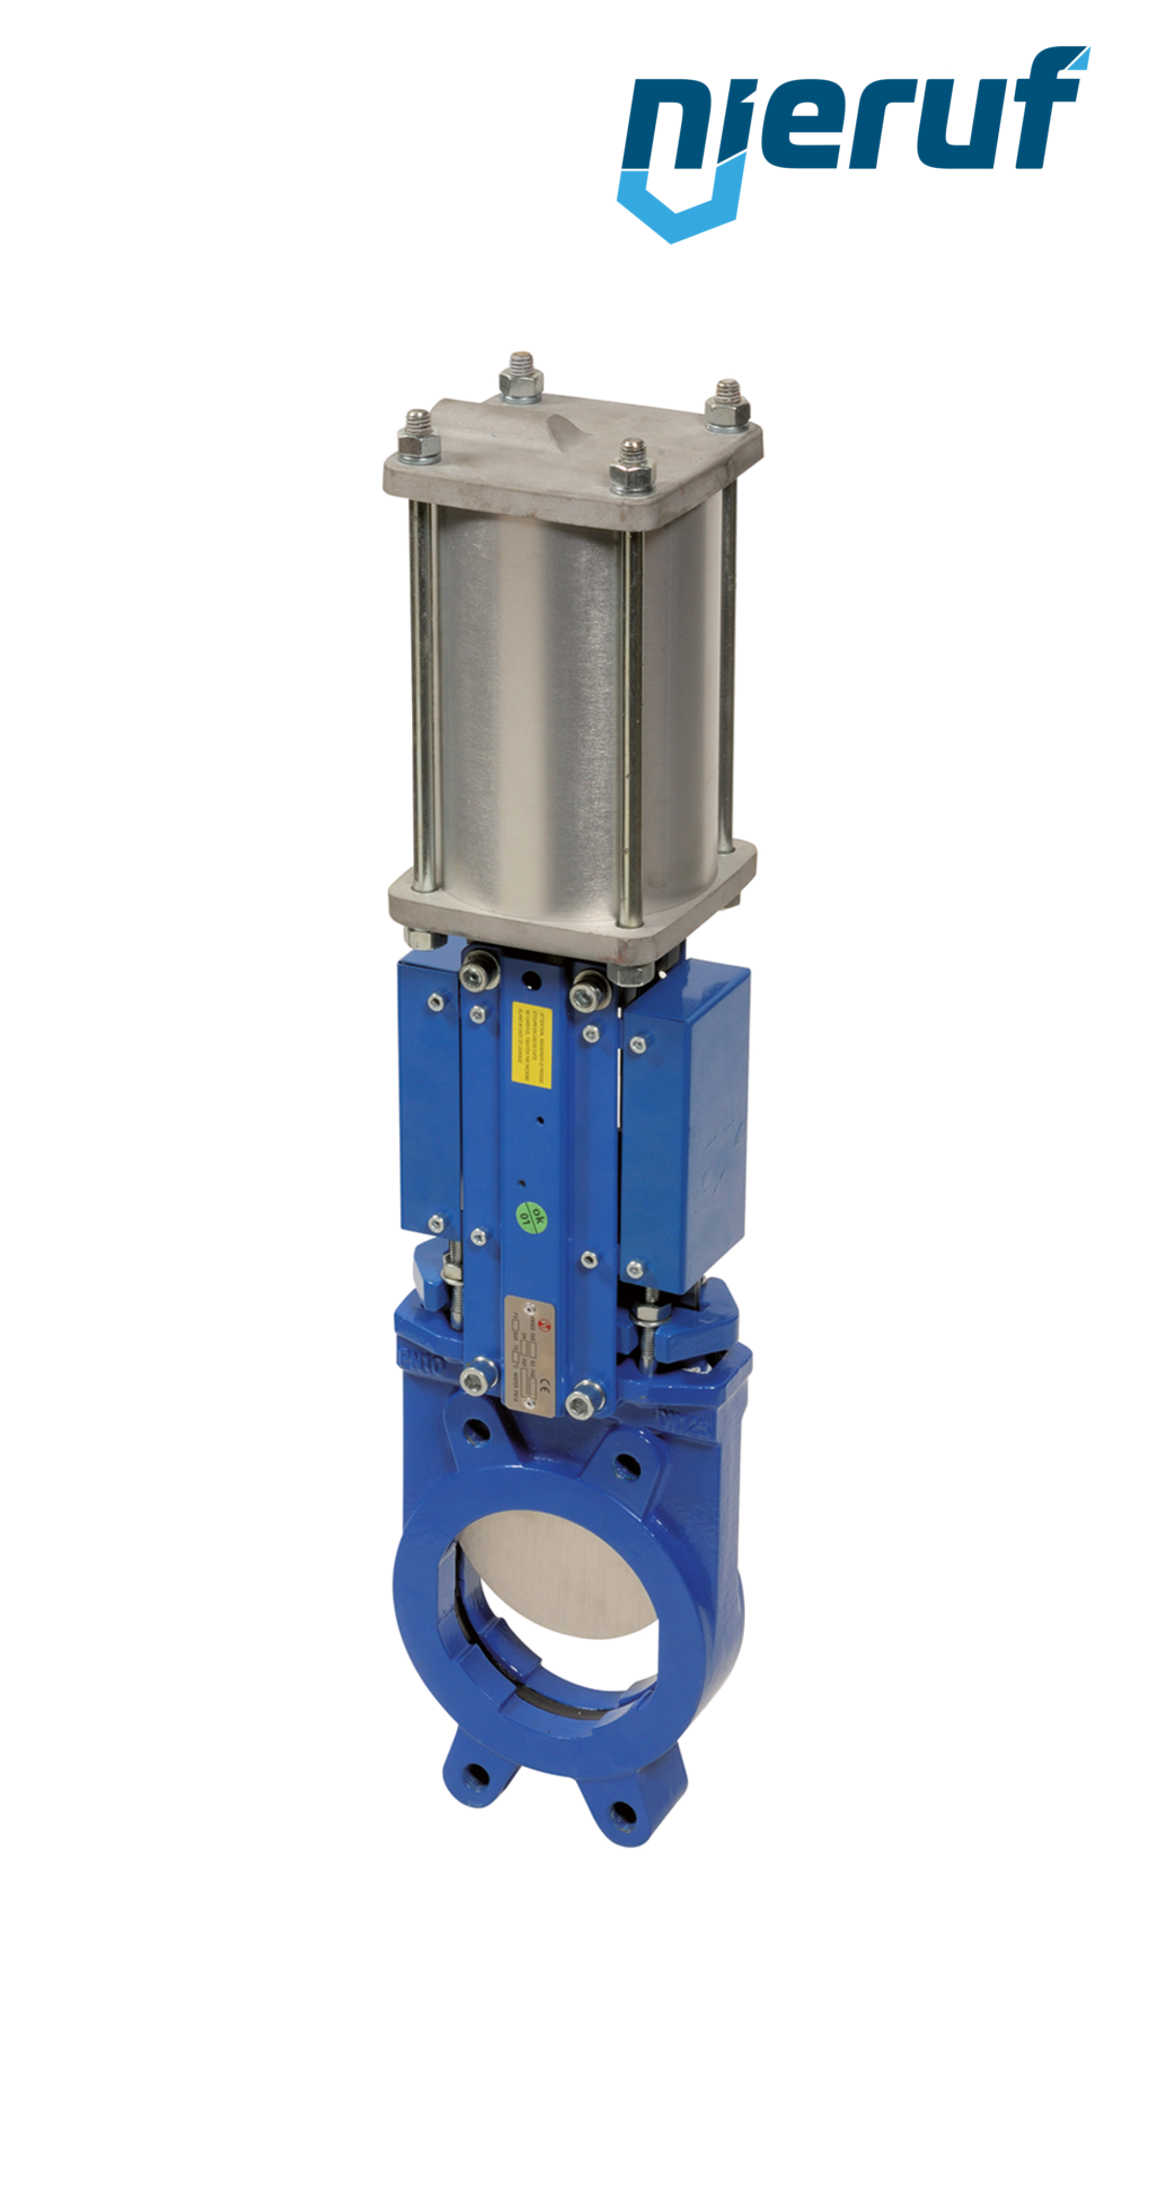 Knife gate valve DN 100 SR01 EPDM pneumatic actuation double acting